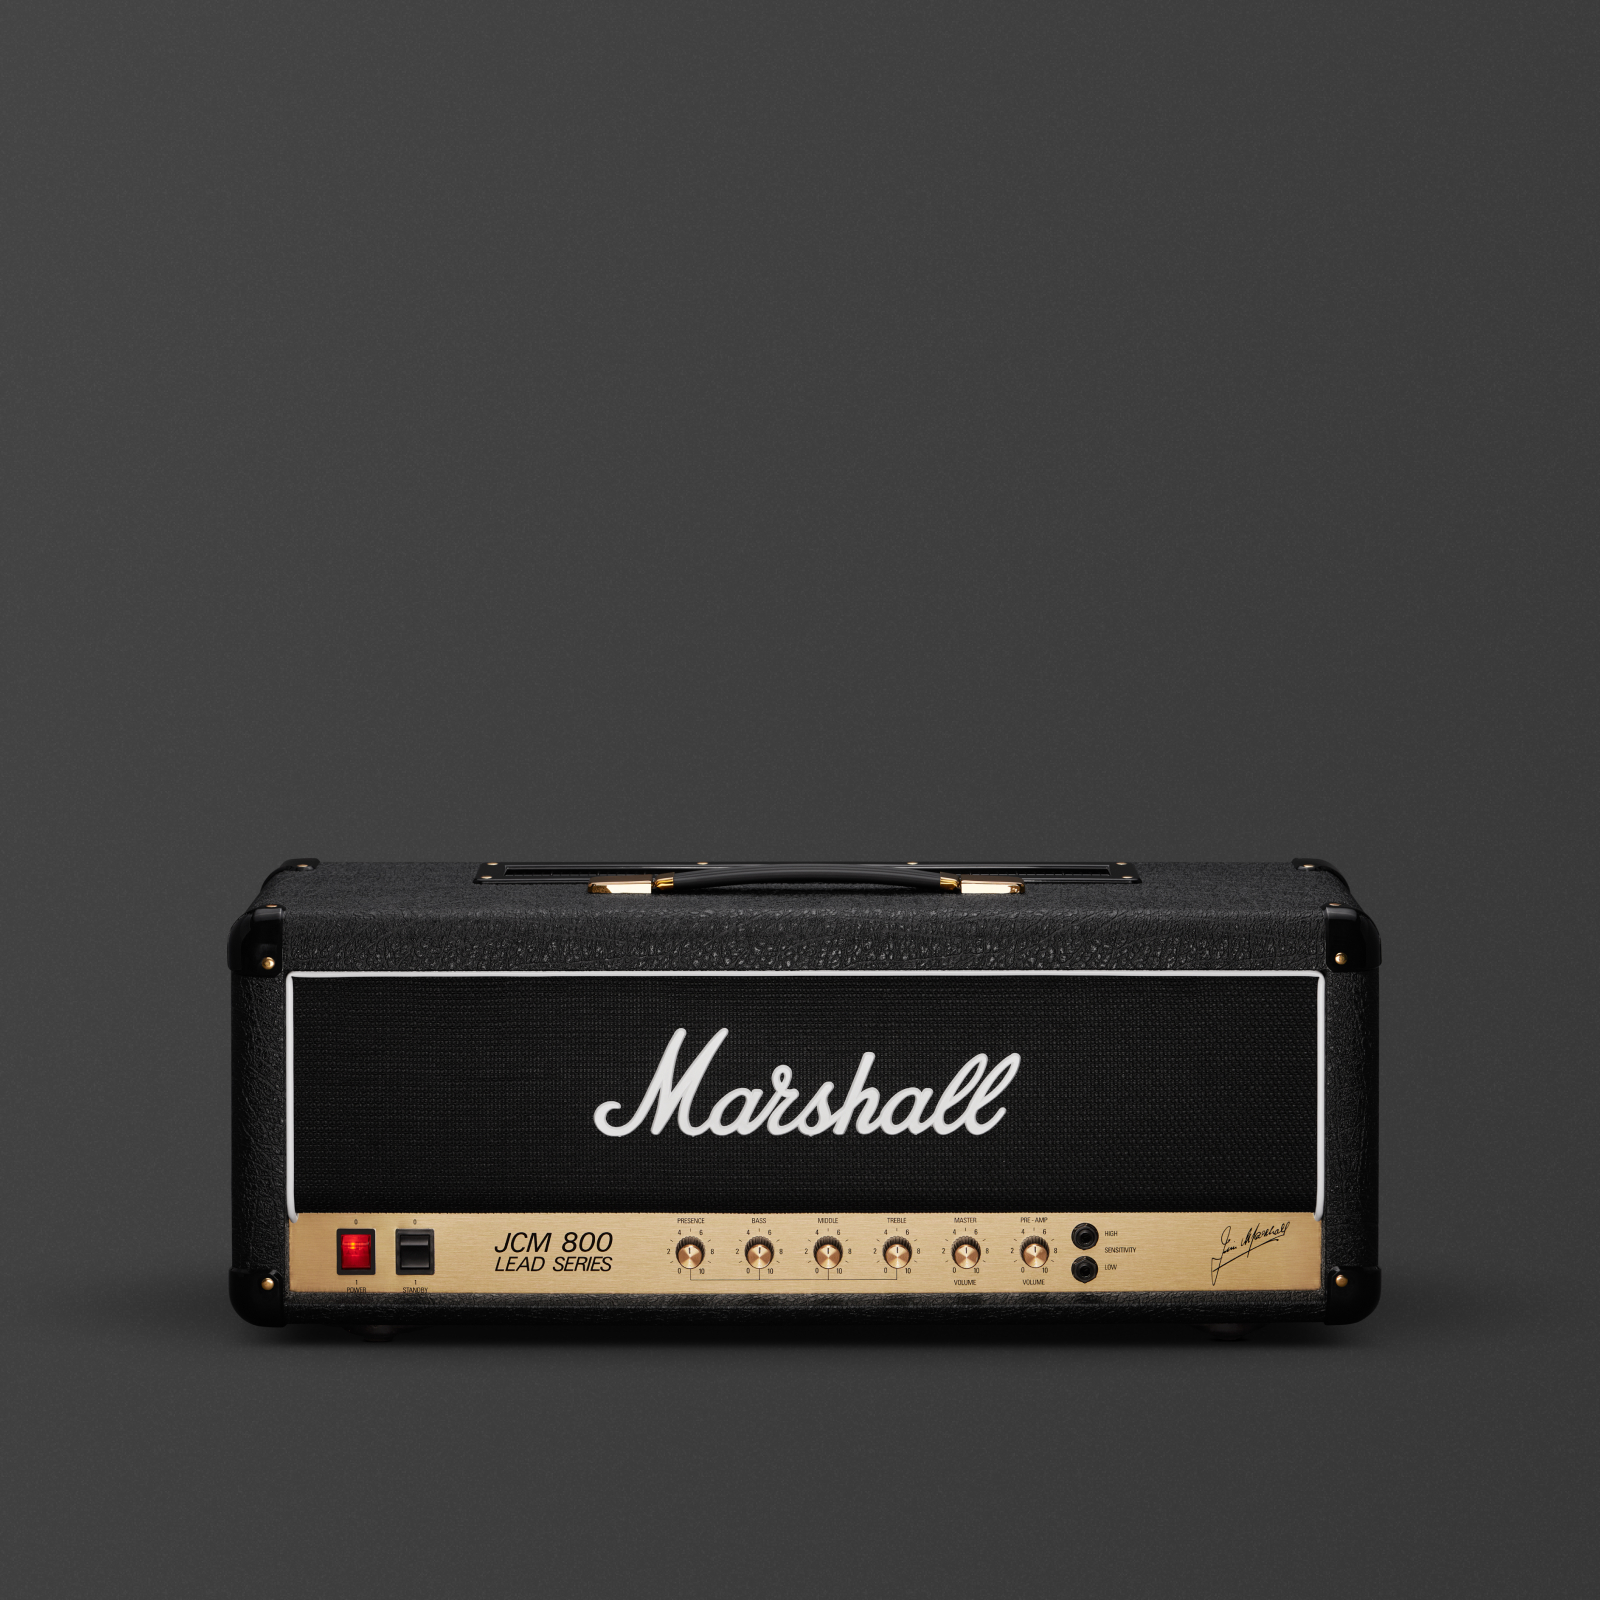 Marshall JCM800 2203 in black and brass